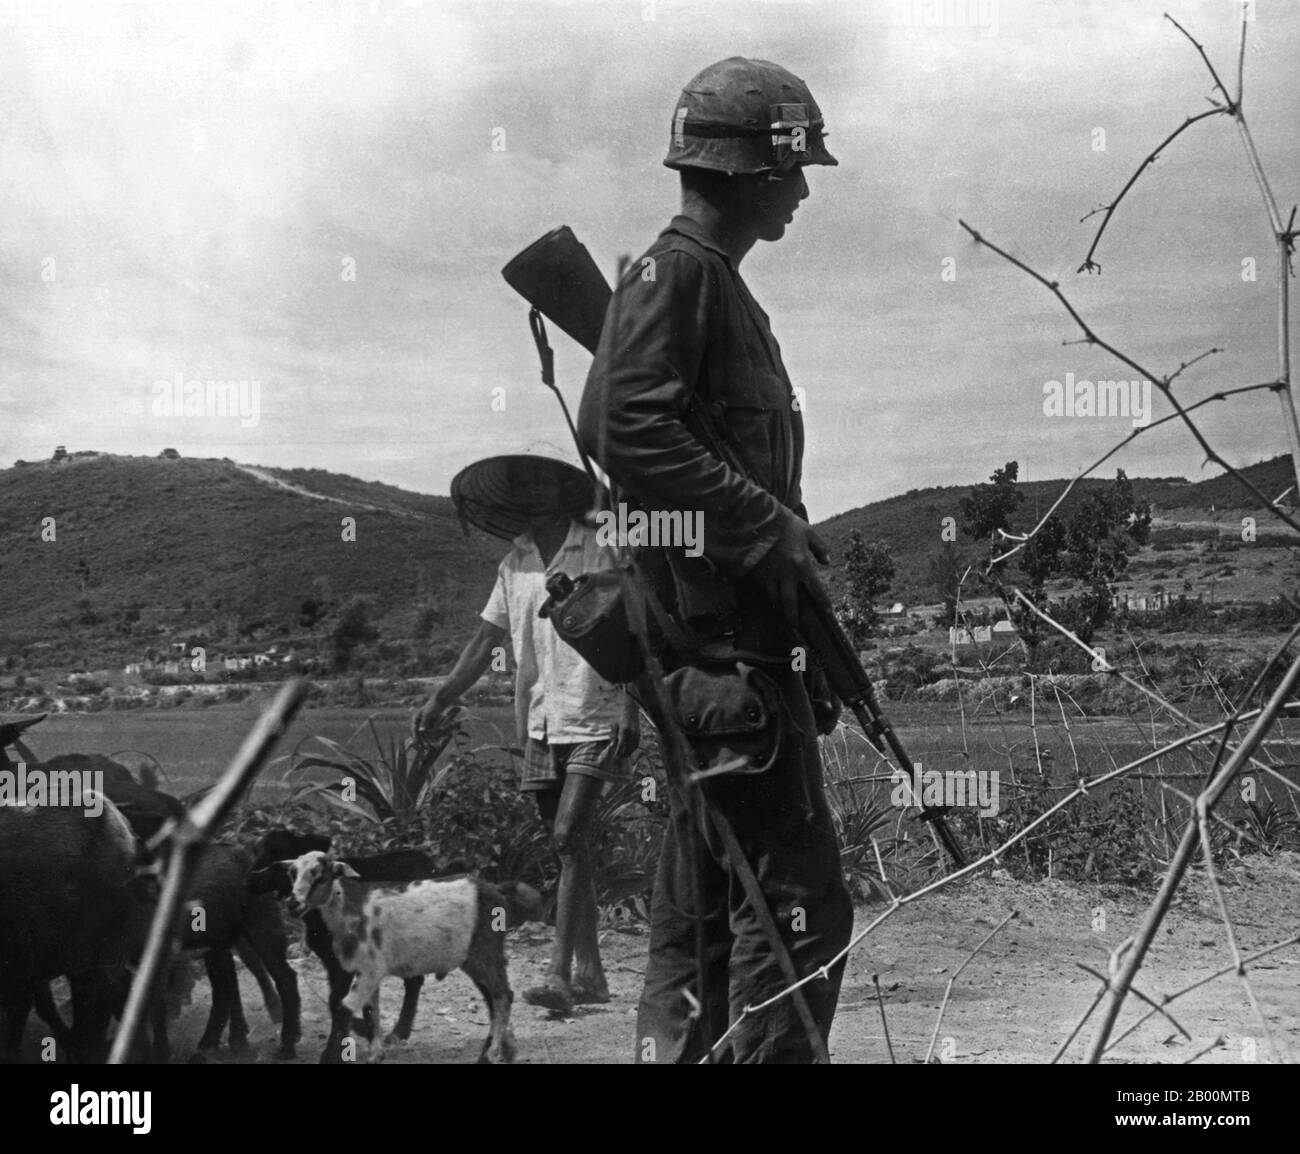 Vietnam: A South Vietnamese farmer passing a US Marine on patrol, 1965.  The Second Indochina War, known in America as the Vietnam War, was a Cold War era military conflict that occurred in Vietnam, Laos, and Cambodia from 1 November 1955 to the fall of Saigon on 30 April 1975. This war followed the First Indochina War and was fought between North Vietnam, supported by its communist allies, and the government of South Vietnam, supported by the U.S. and other anti-communist nations. The U.S. government viewed involvement in the war as a way to prevent a communist takeover of South Vietnam. Stock Photo